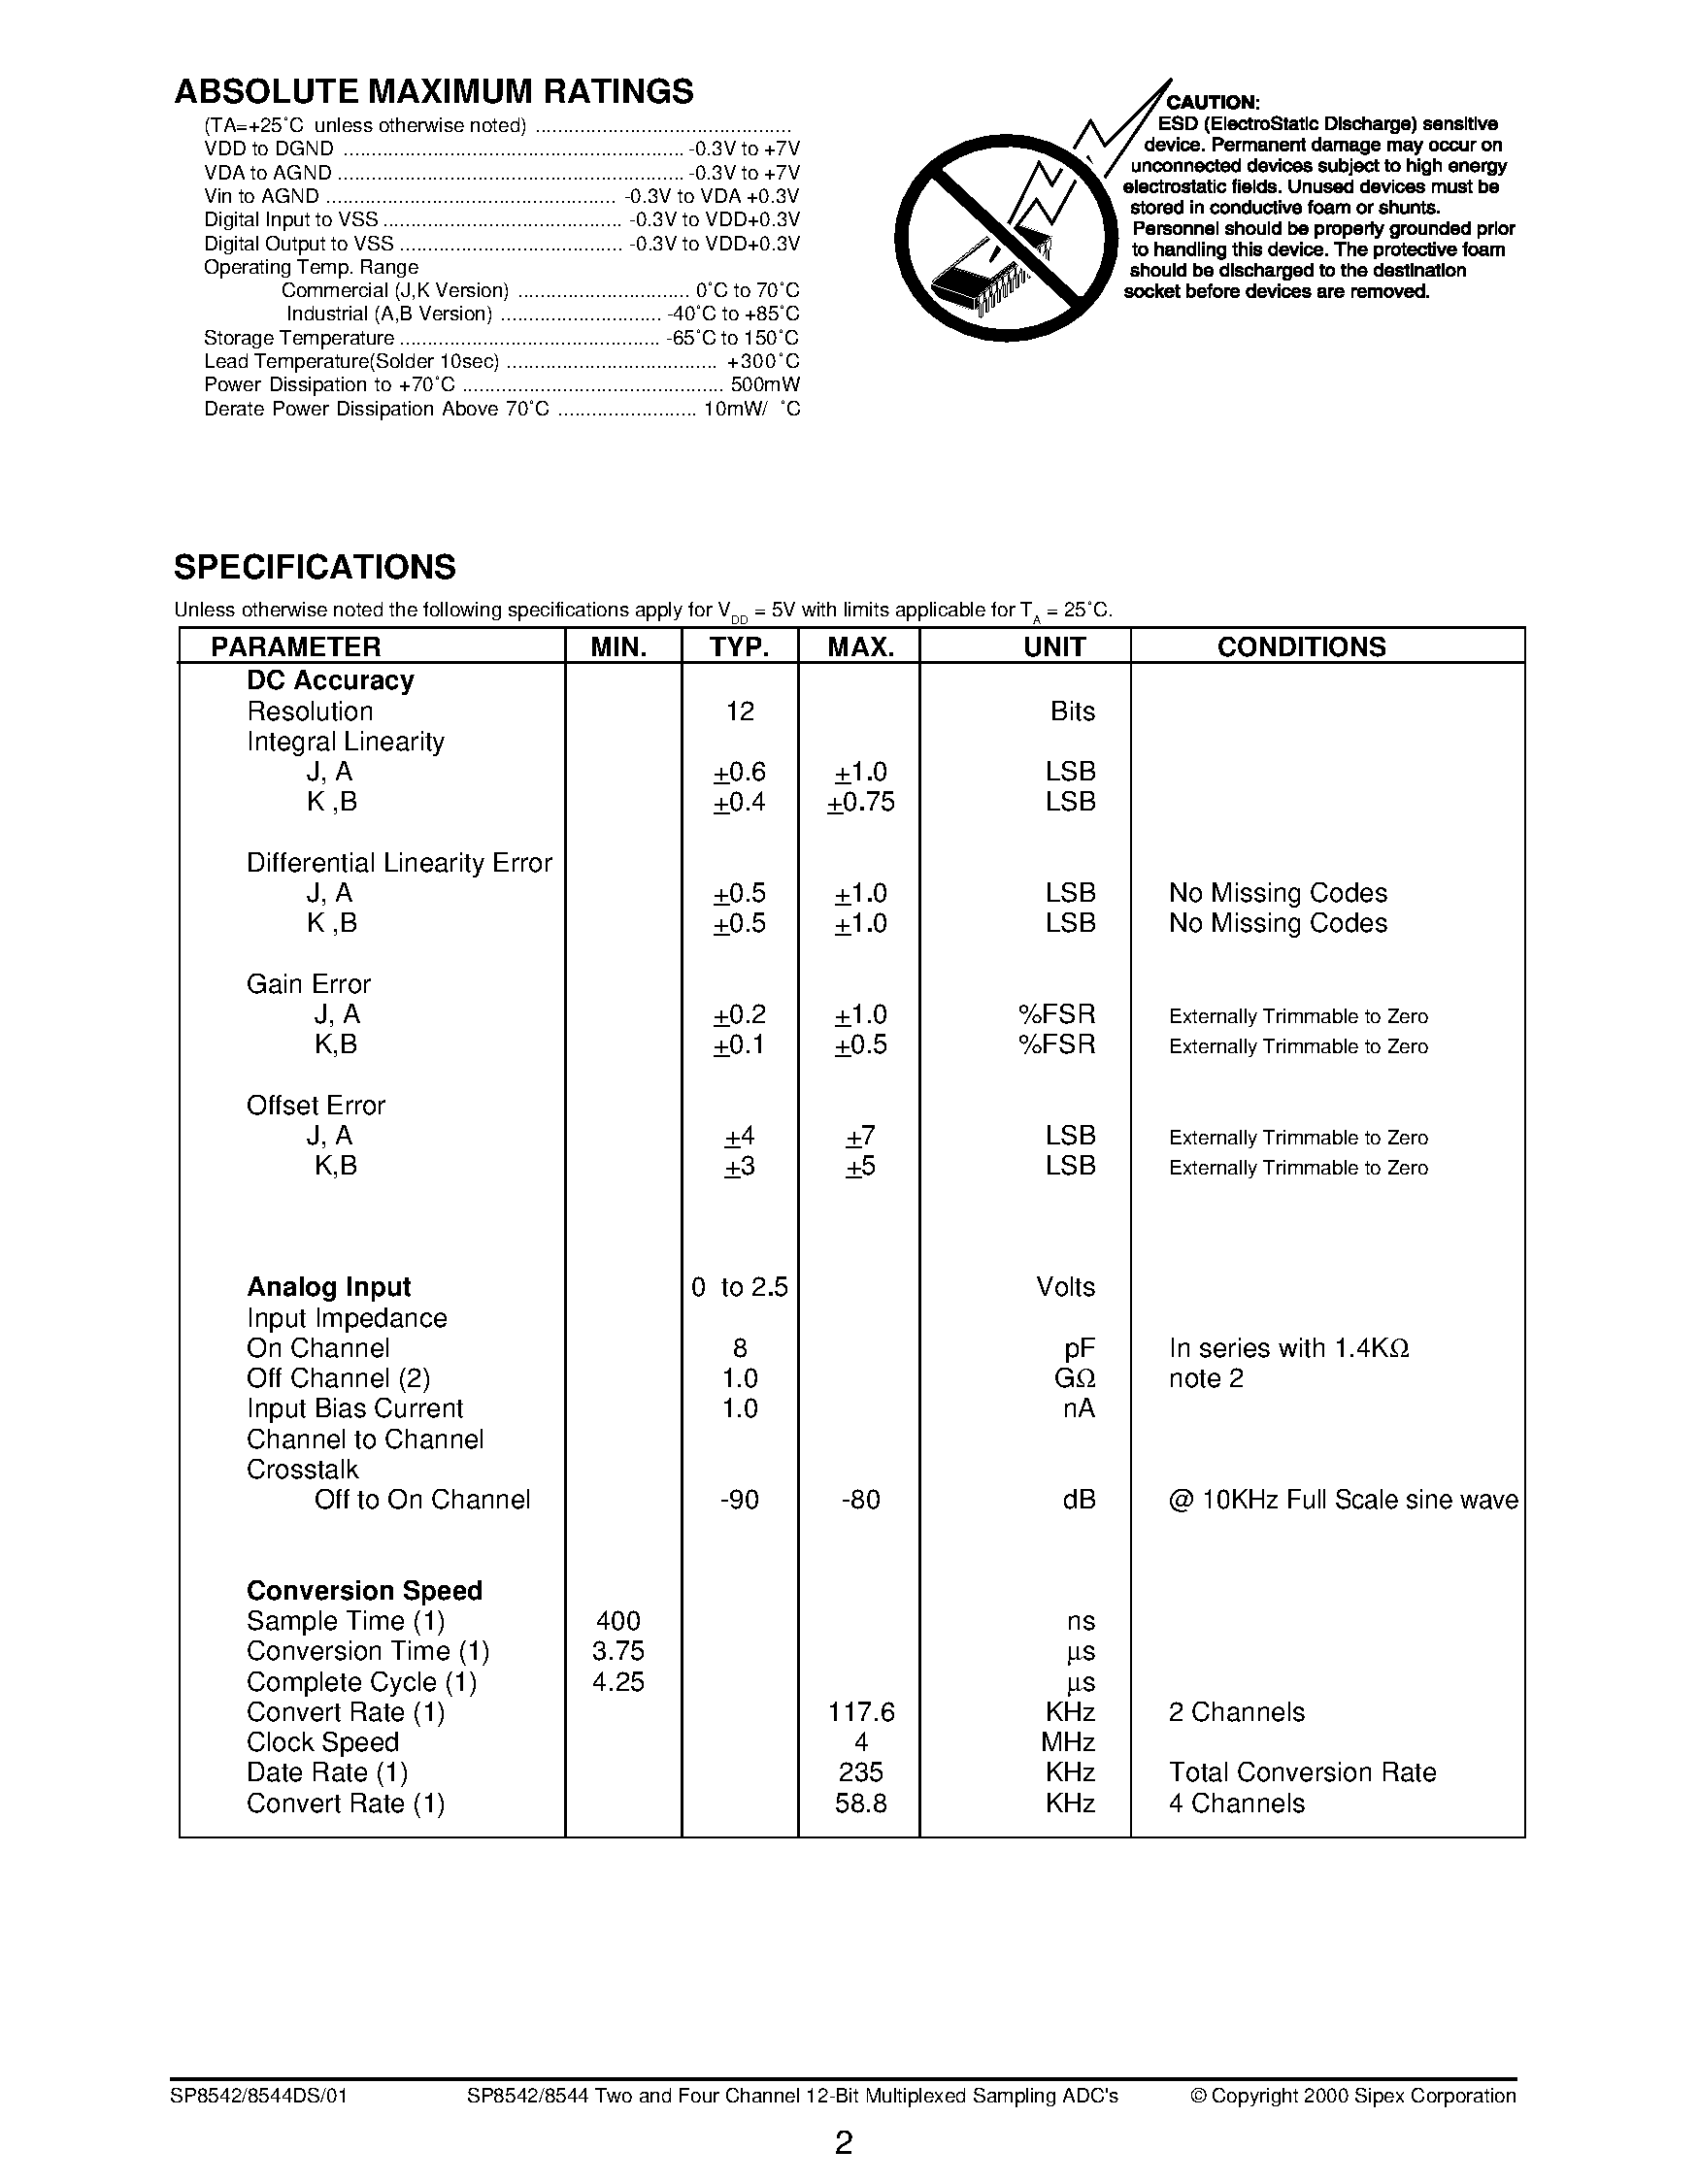 Datasheet SP8544AS - Two and Four Channel 12-Bit Multiplexed Sampling ADCs page 2